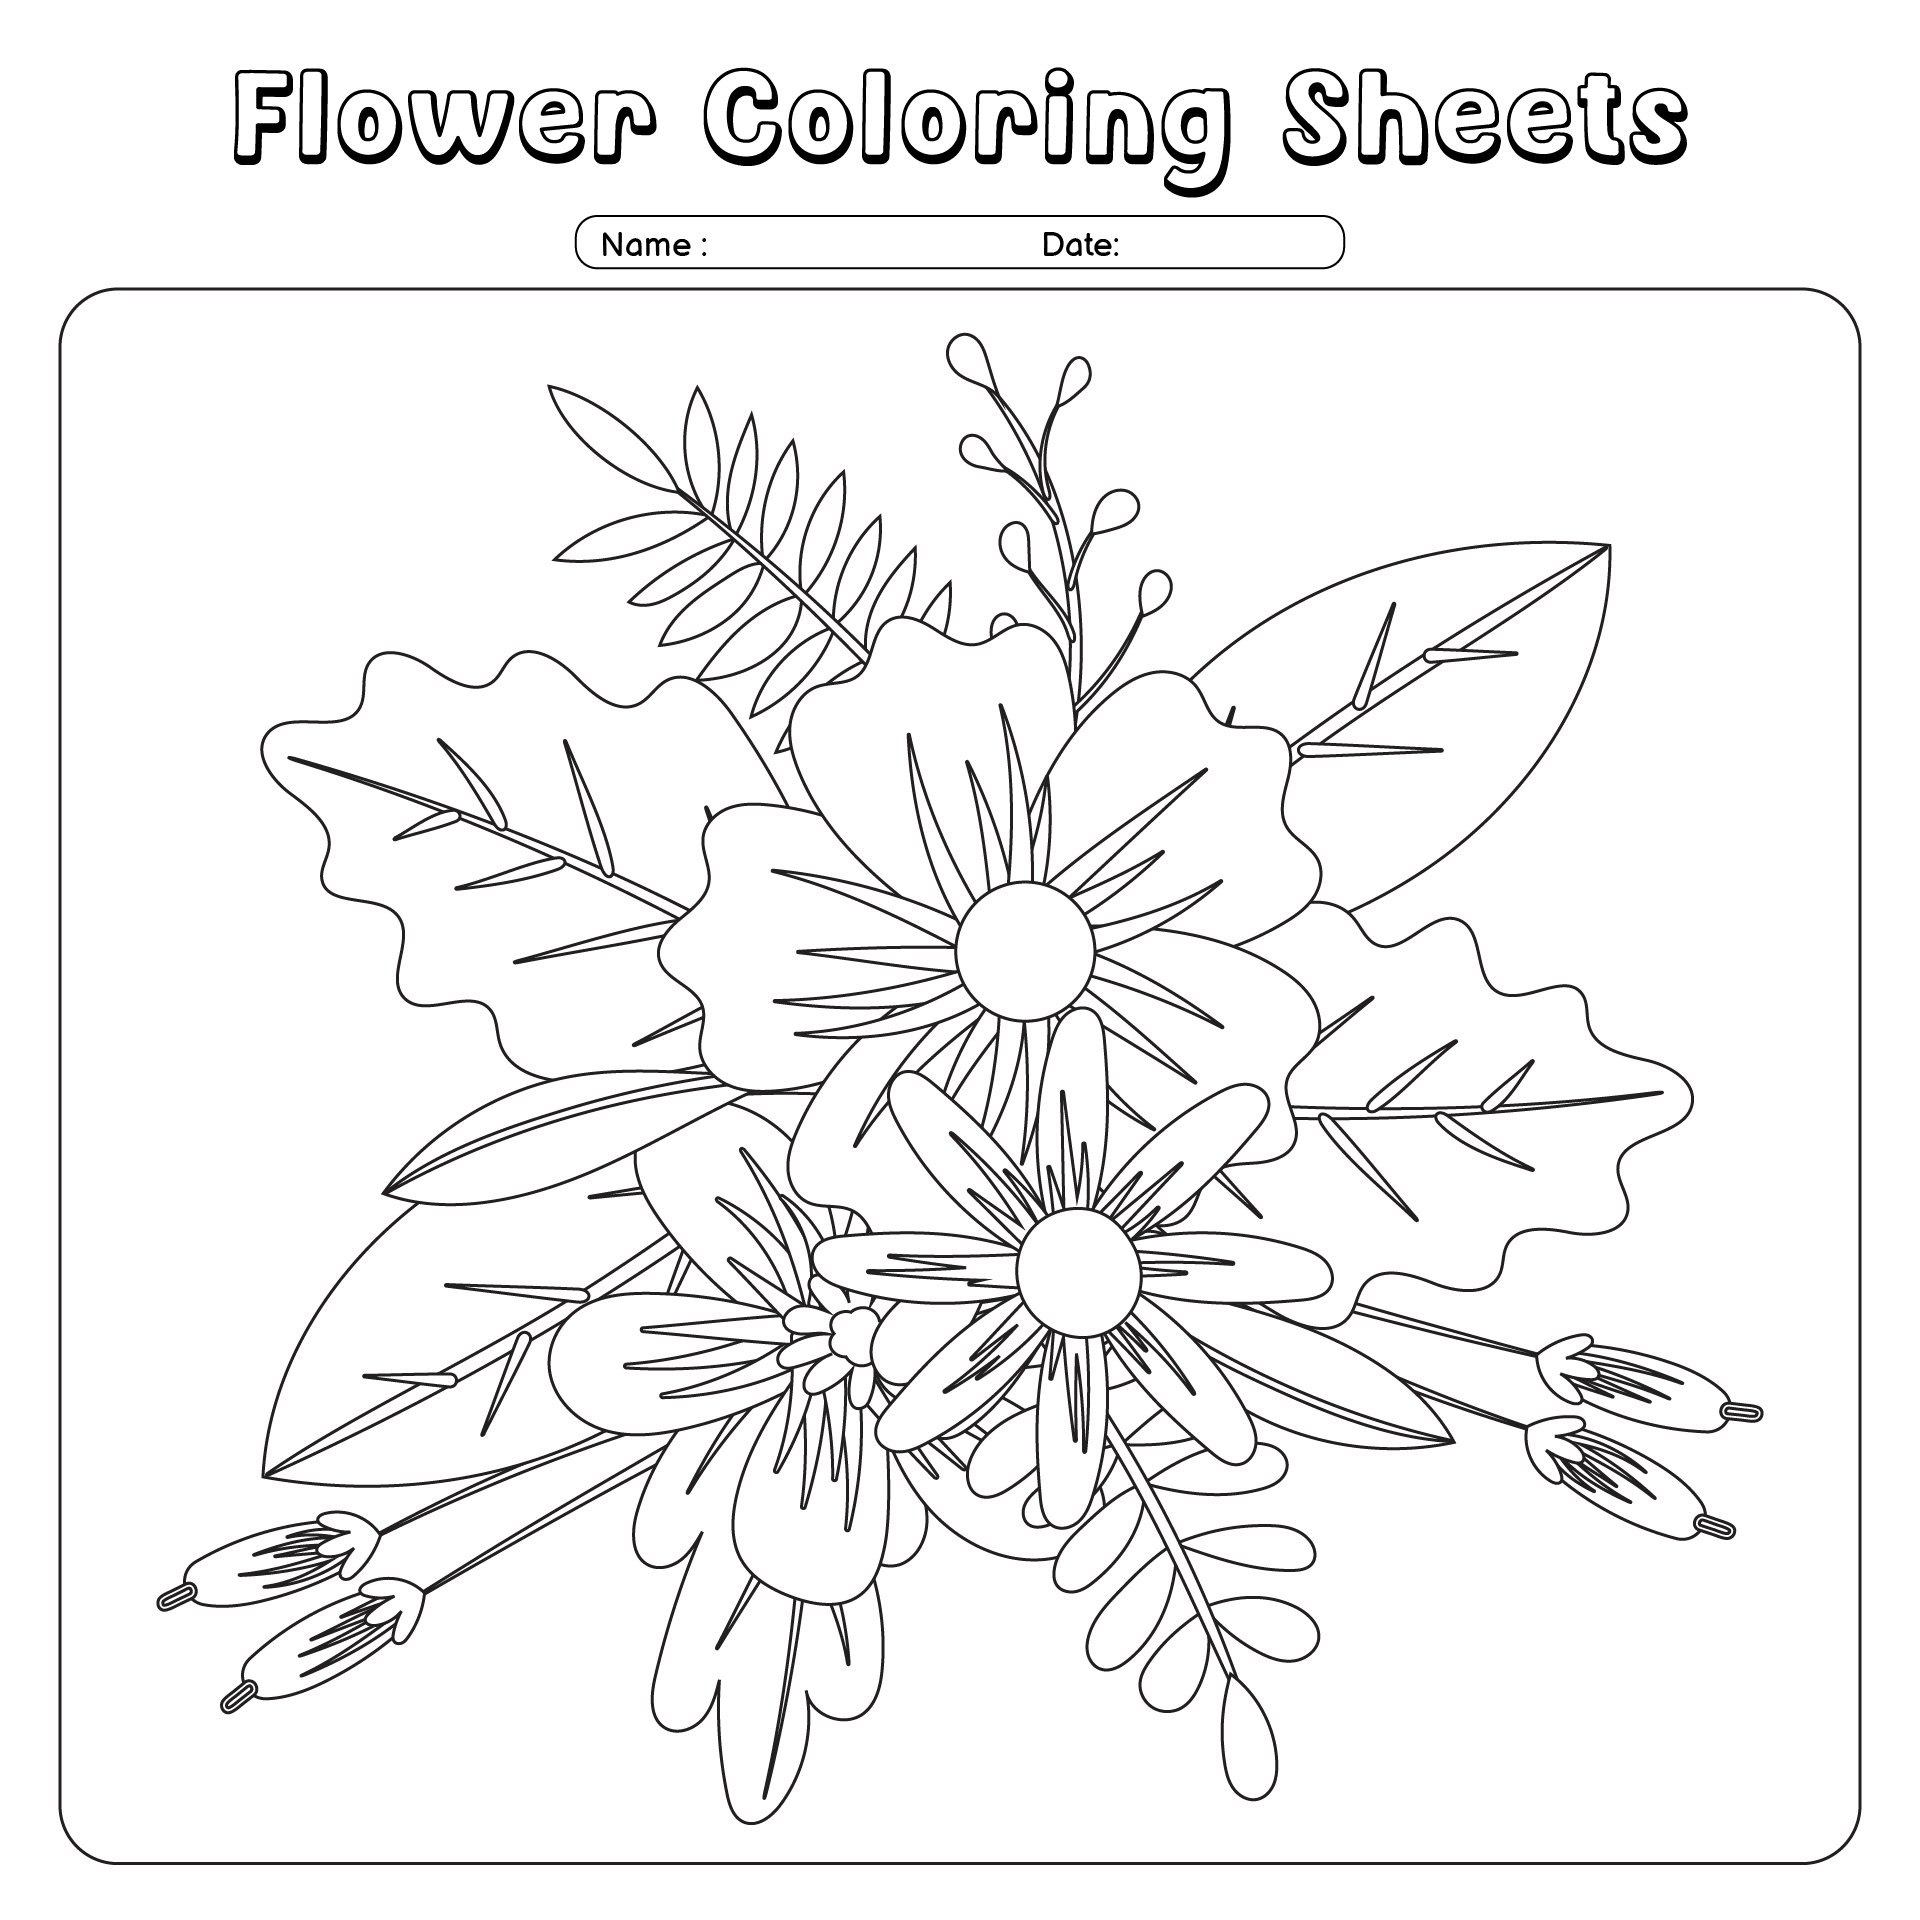 Flower Coloring Sheets Template